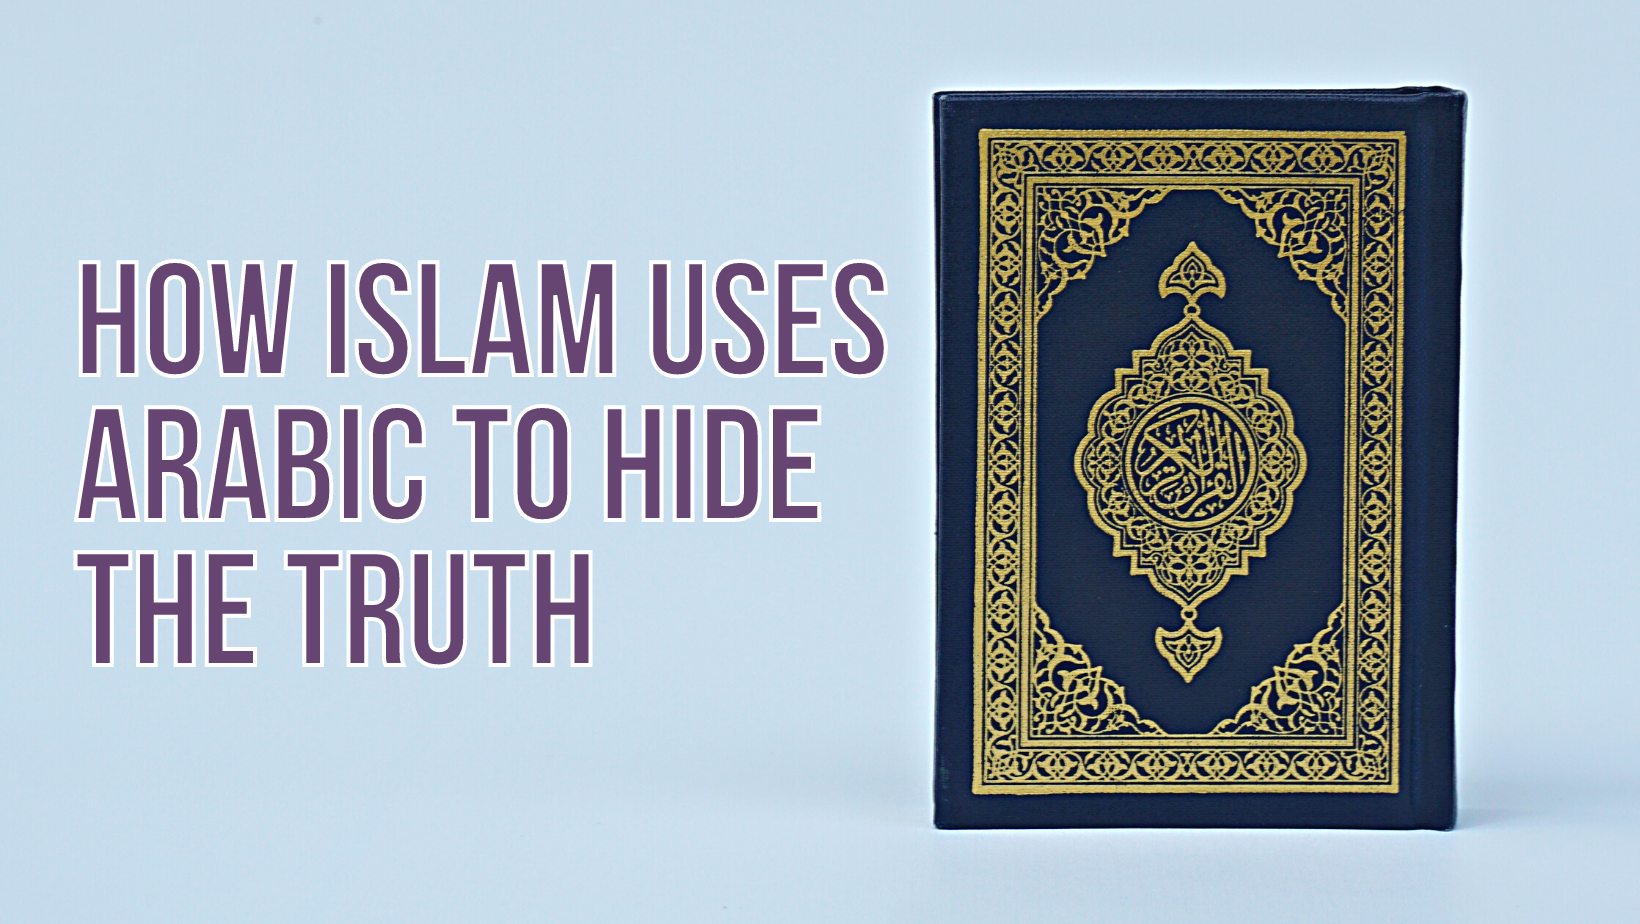 How Islam uses Arabic to hide the truth